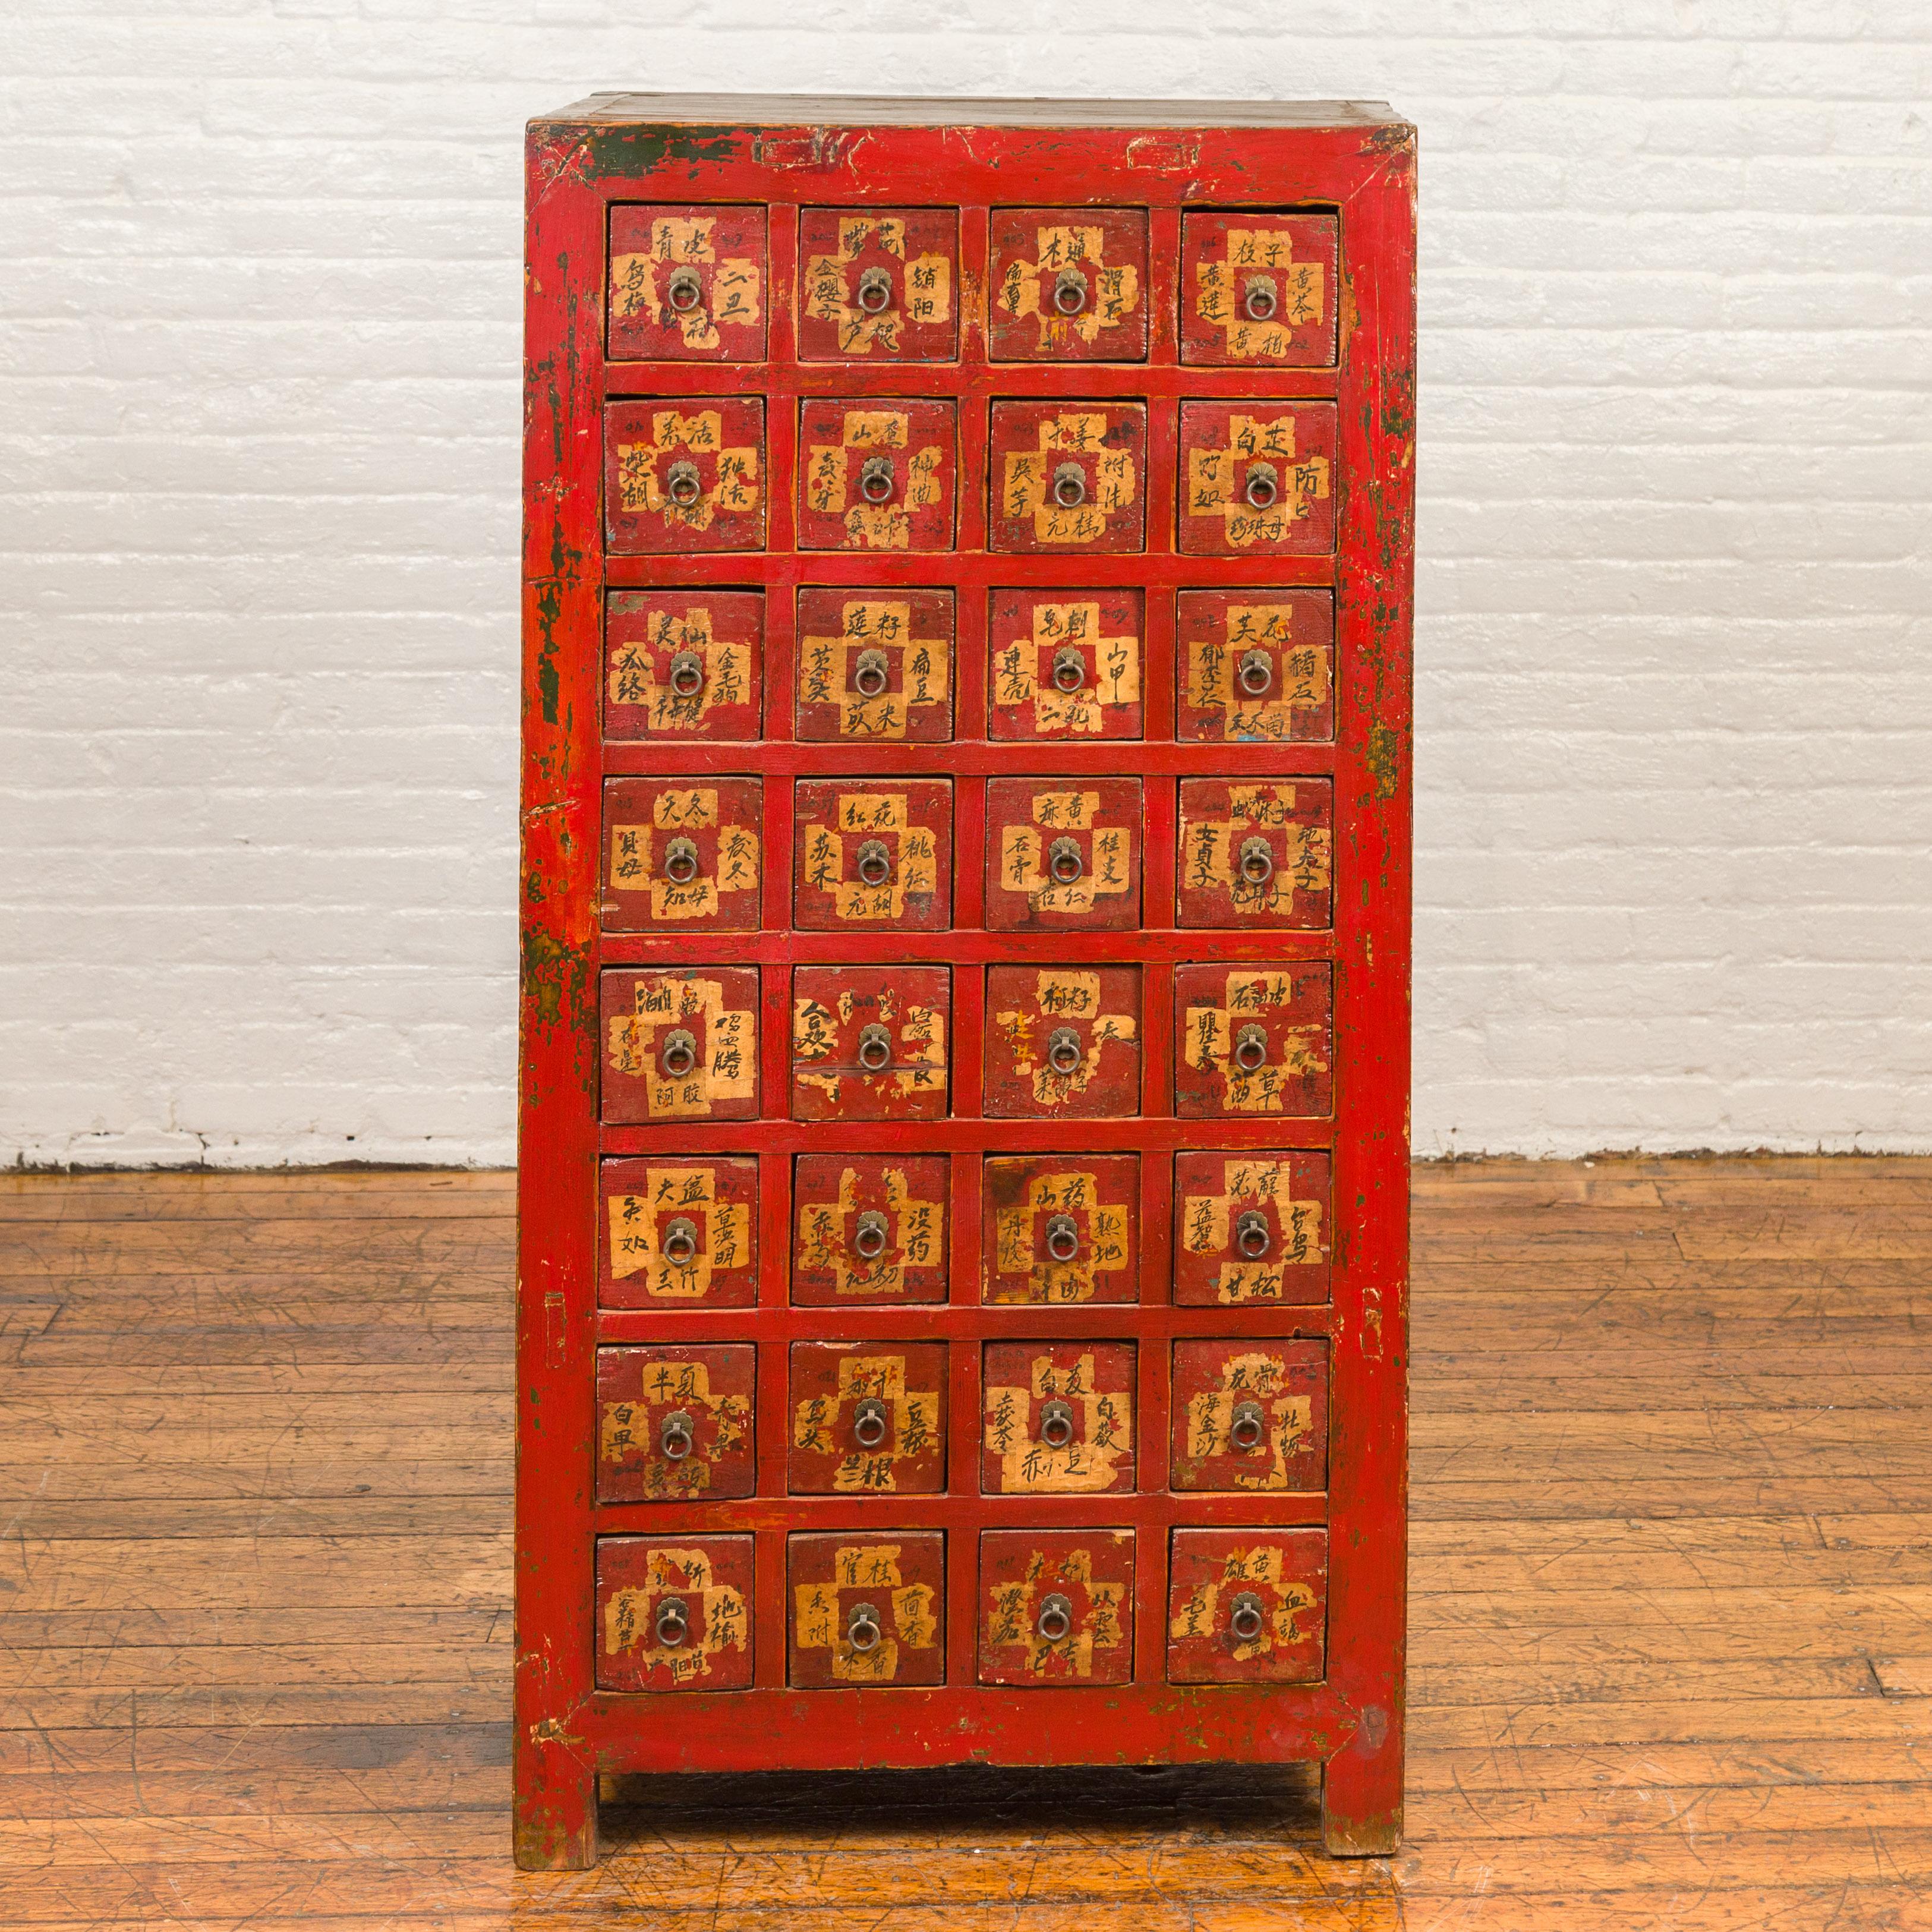 A Chinese Qing dynasty red lacquered apothecary chest from the 19th century, with 32 drawers and calligraphed painted labels. Crafted in China during the Qing dynasty period, this tall apothecary chest boasting a red lacquered body and a nicely